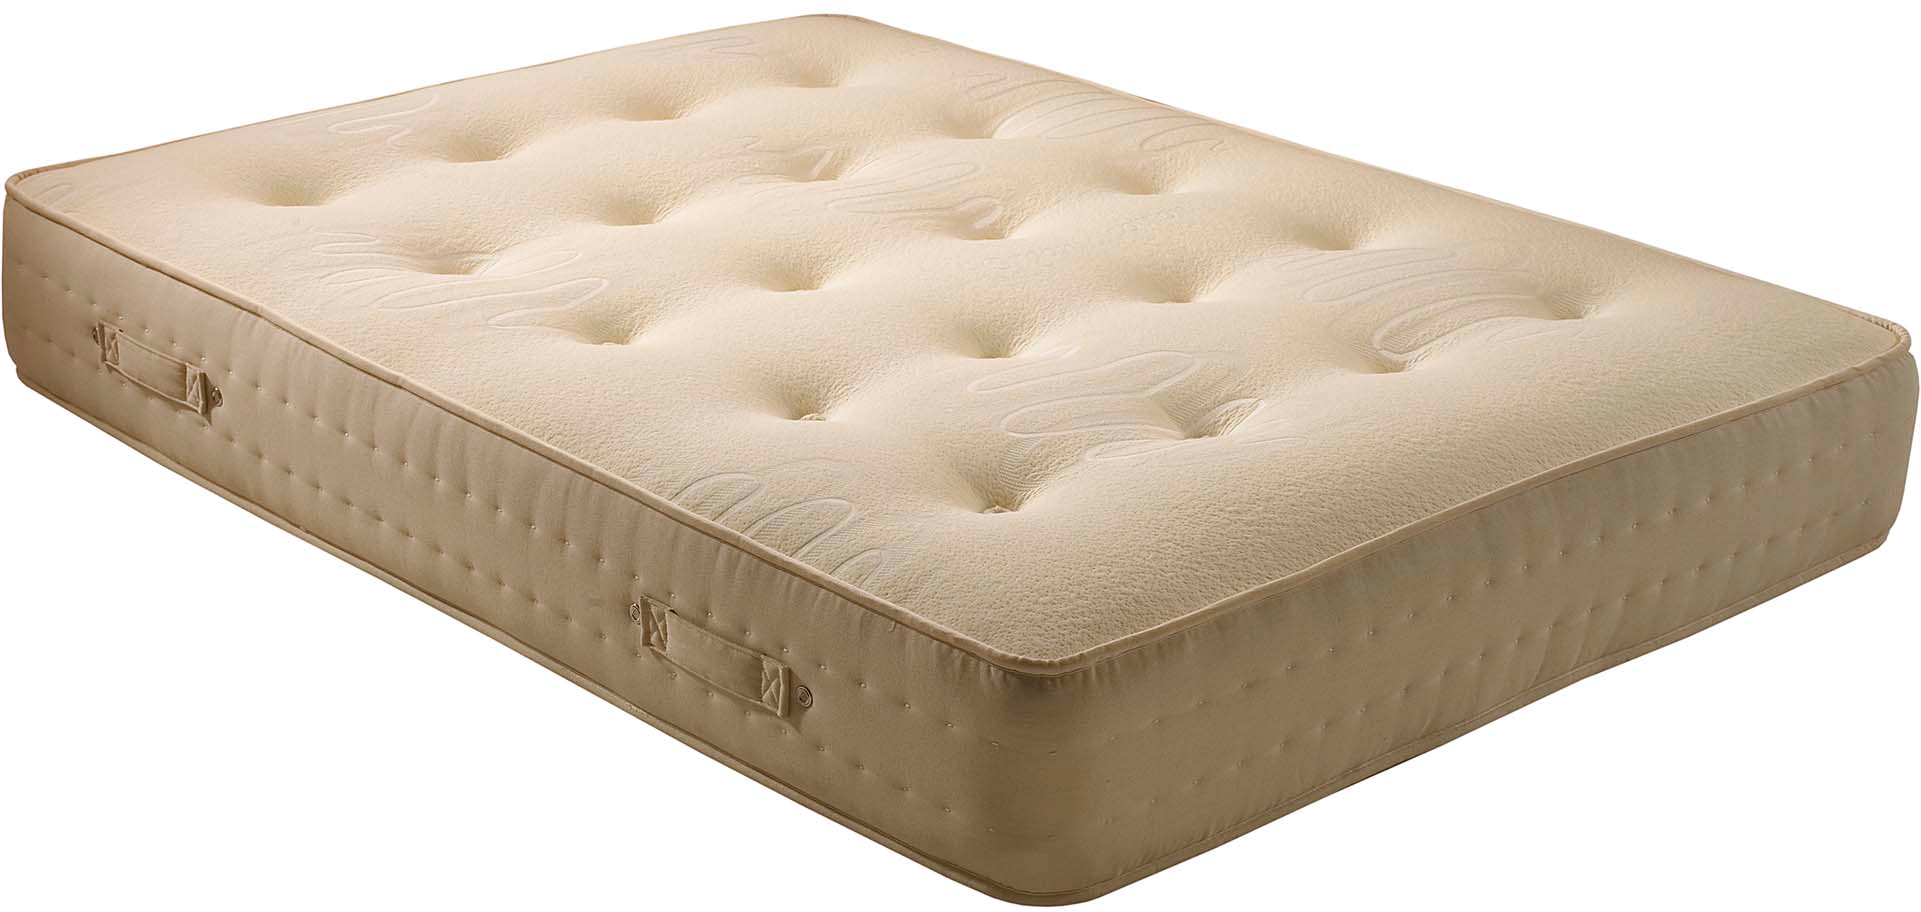 PNG HD Of A Bed - 144298